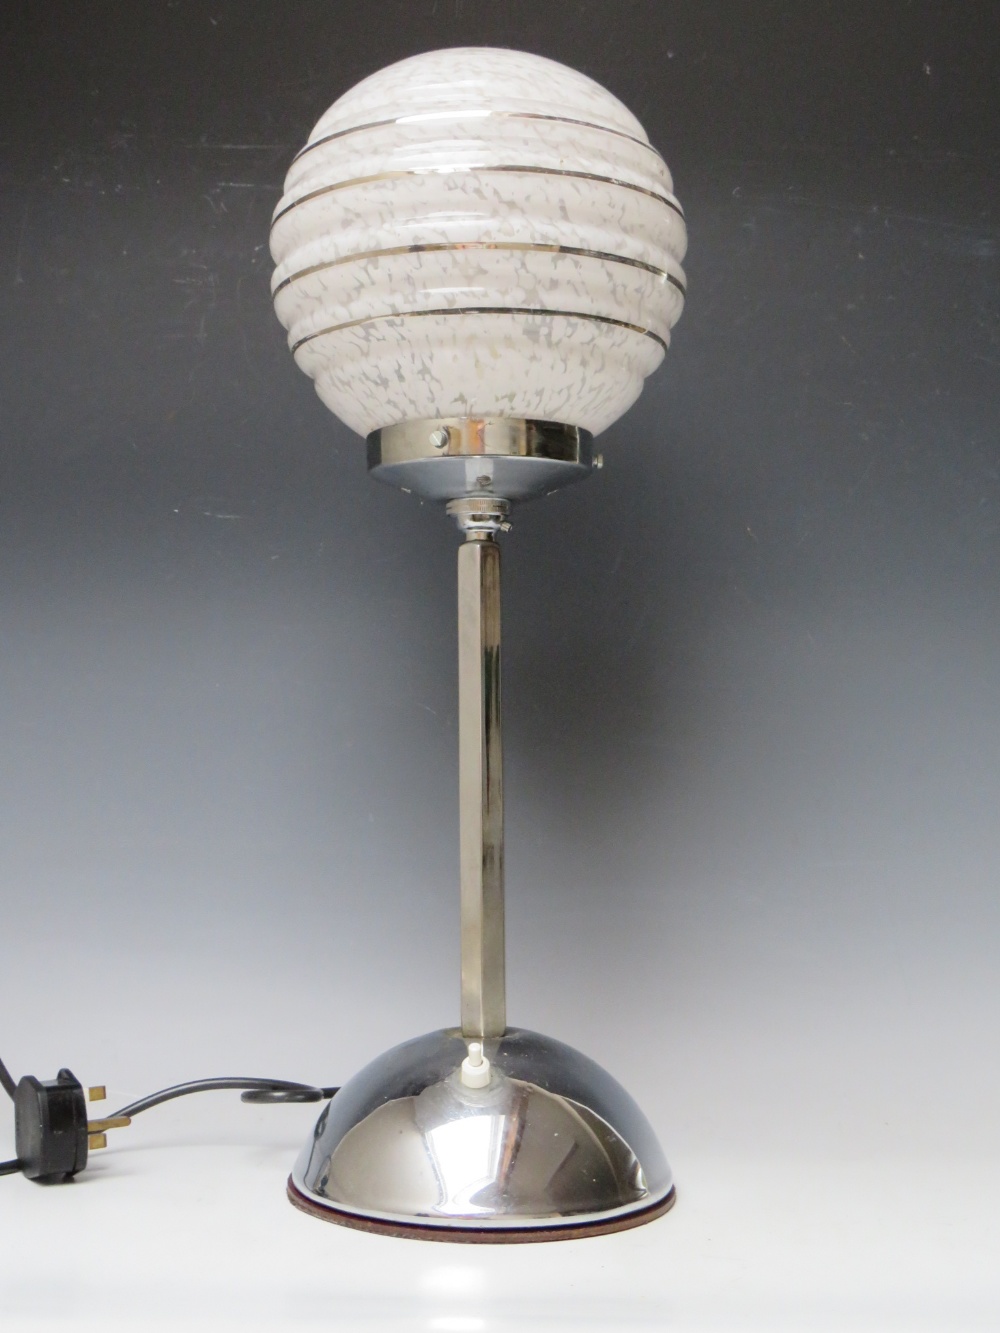 A CHROME ART DECO TABLE LAMP WITH PERIOD SHADE, overall H 53.5 cm